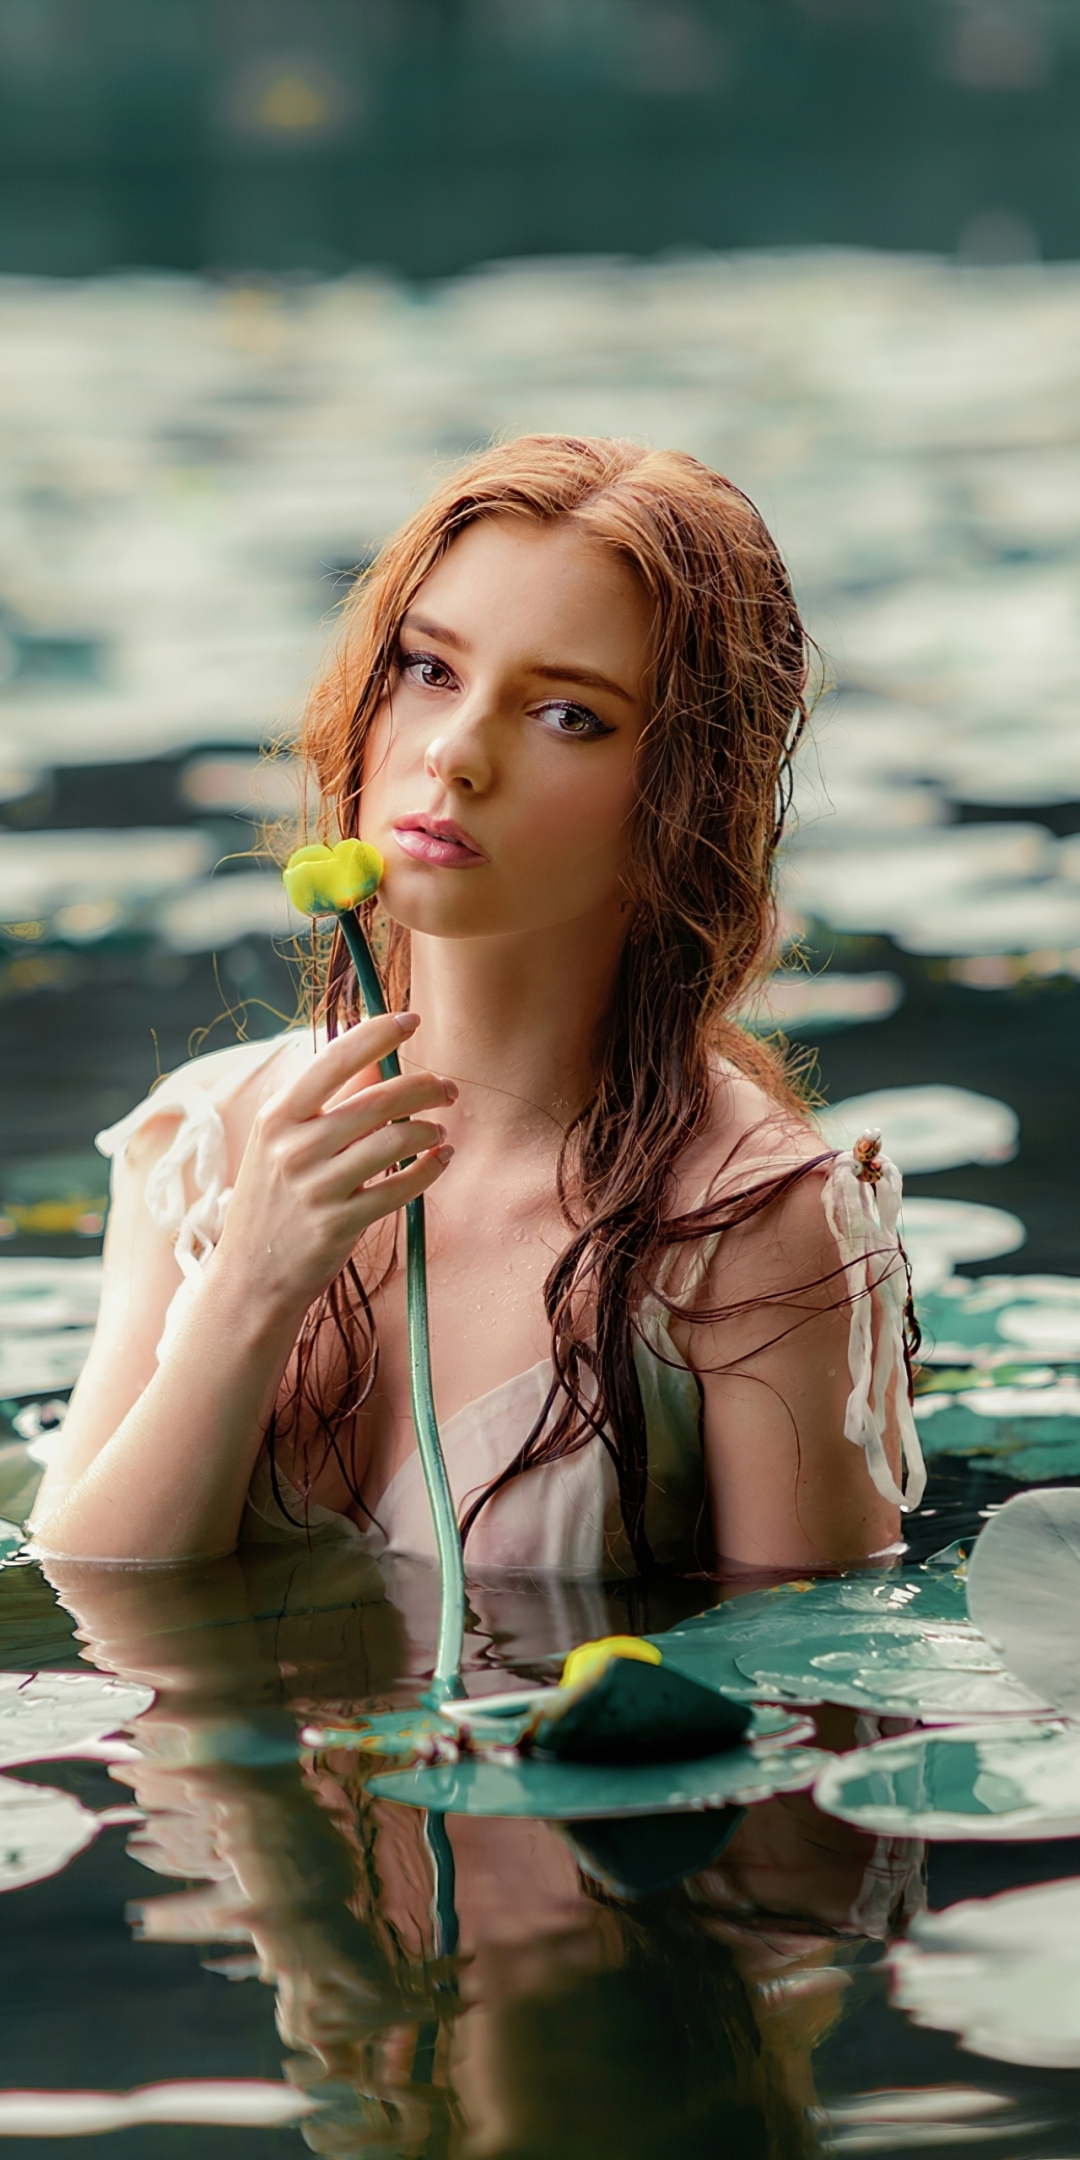 Girl with flowers, outdoor, lake, 1080x2160 wallpaper